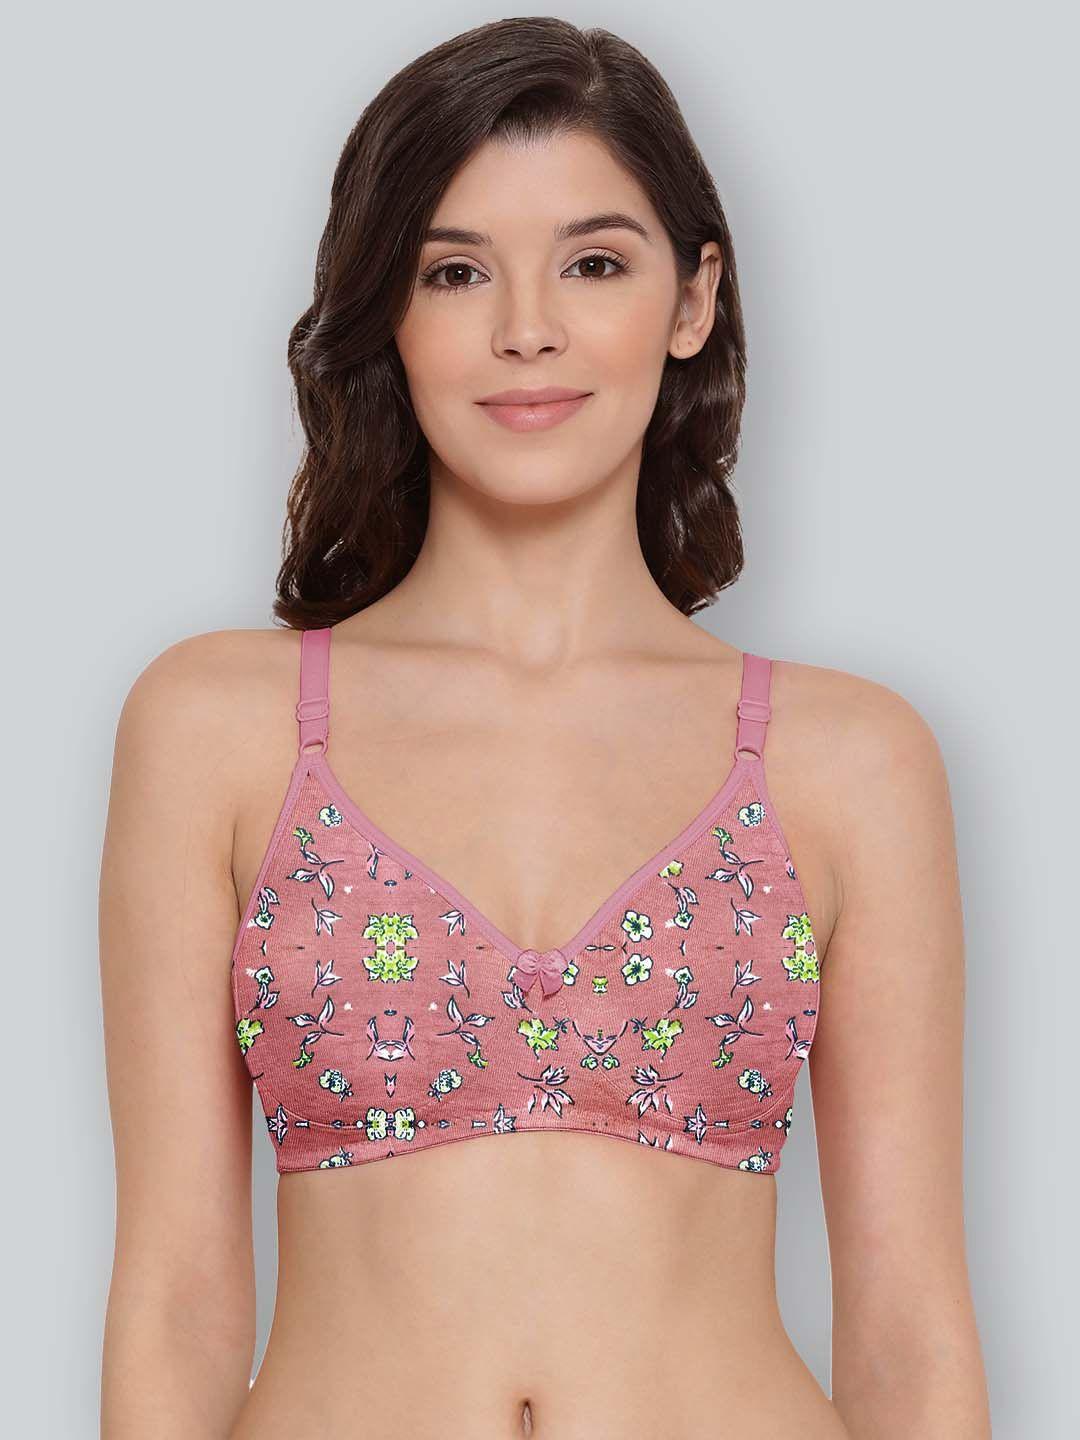 lyra floral printed soft detachable straps cotton t-shirt bra with all day comfort